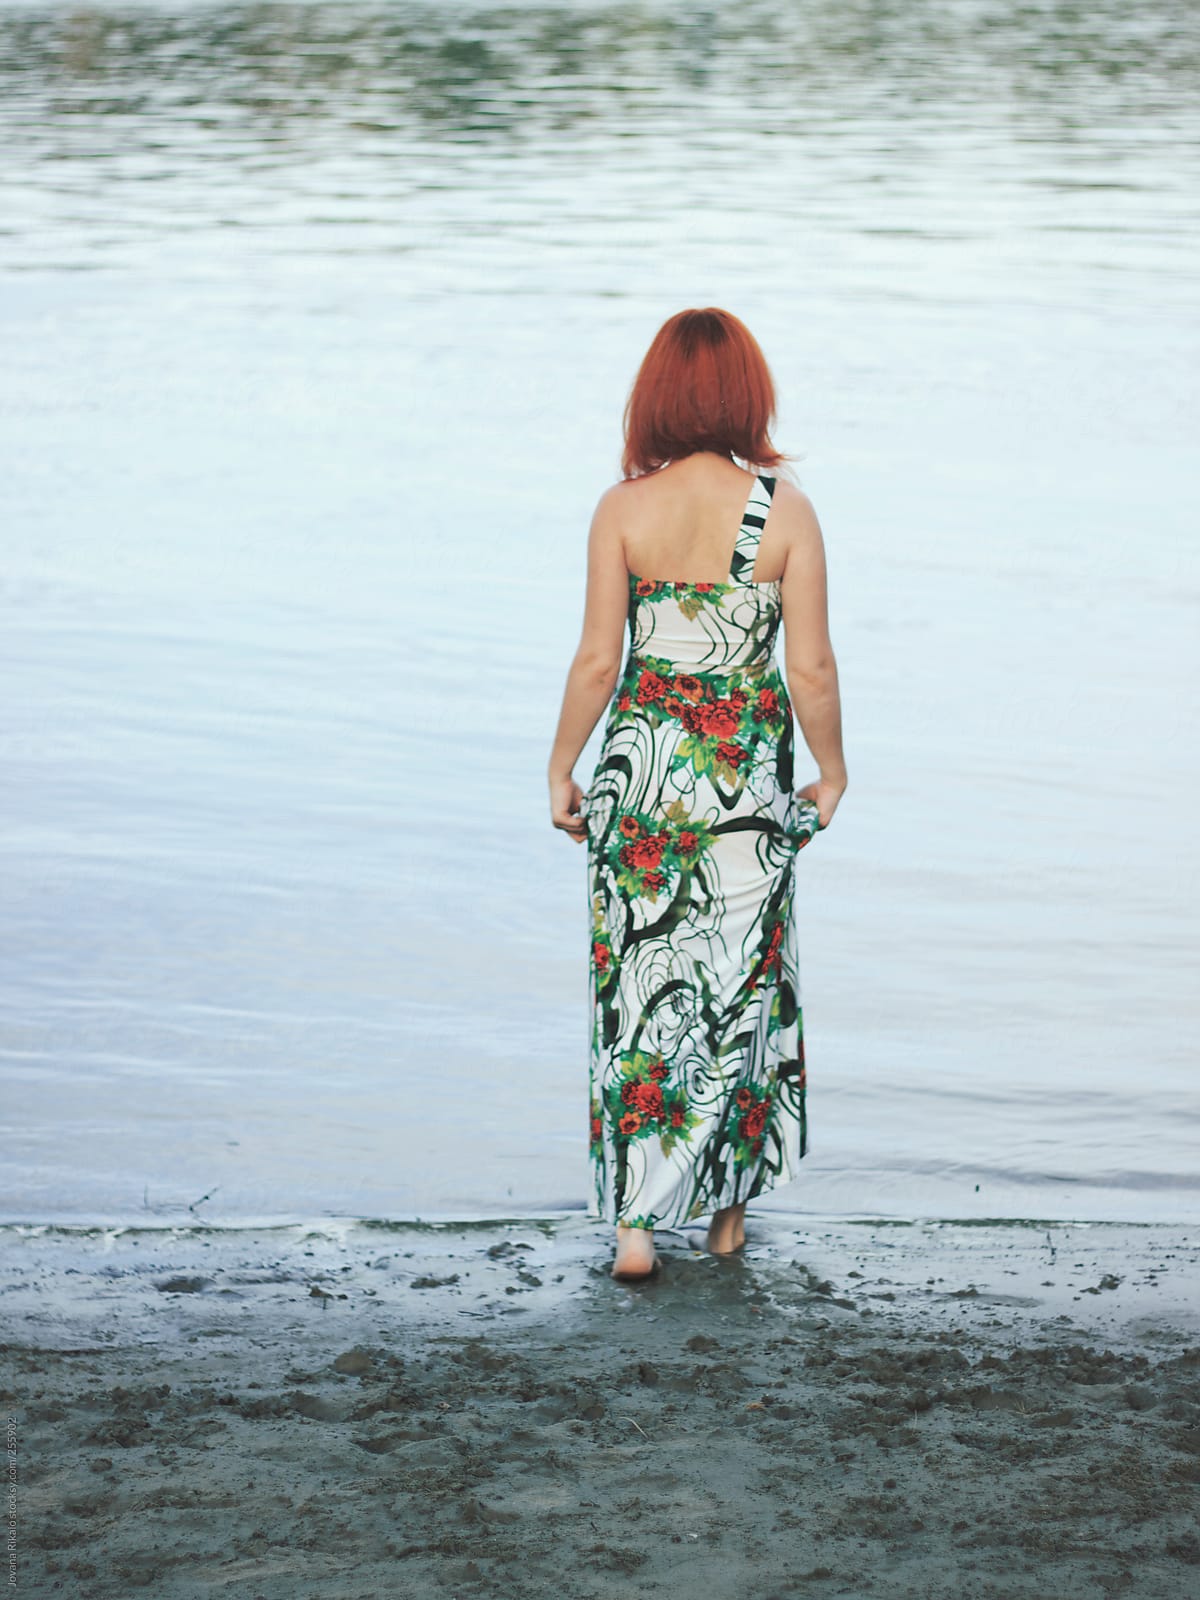 Back View Of A Young Woman Walking Into Water By Stocksy Contributor